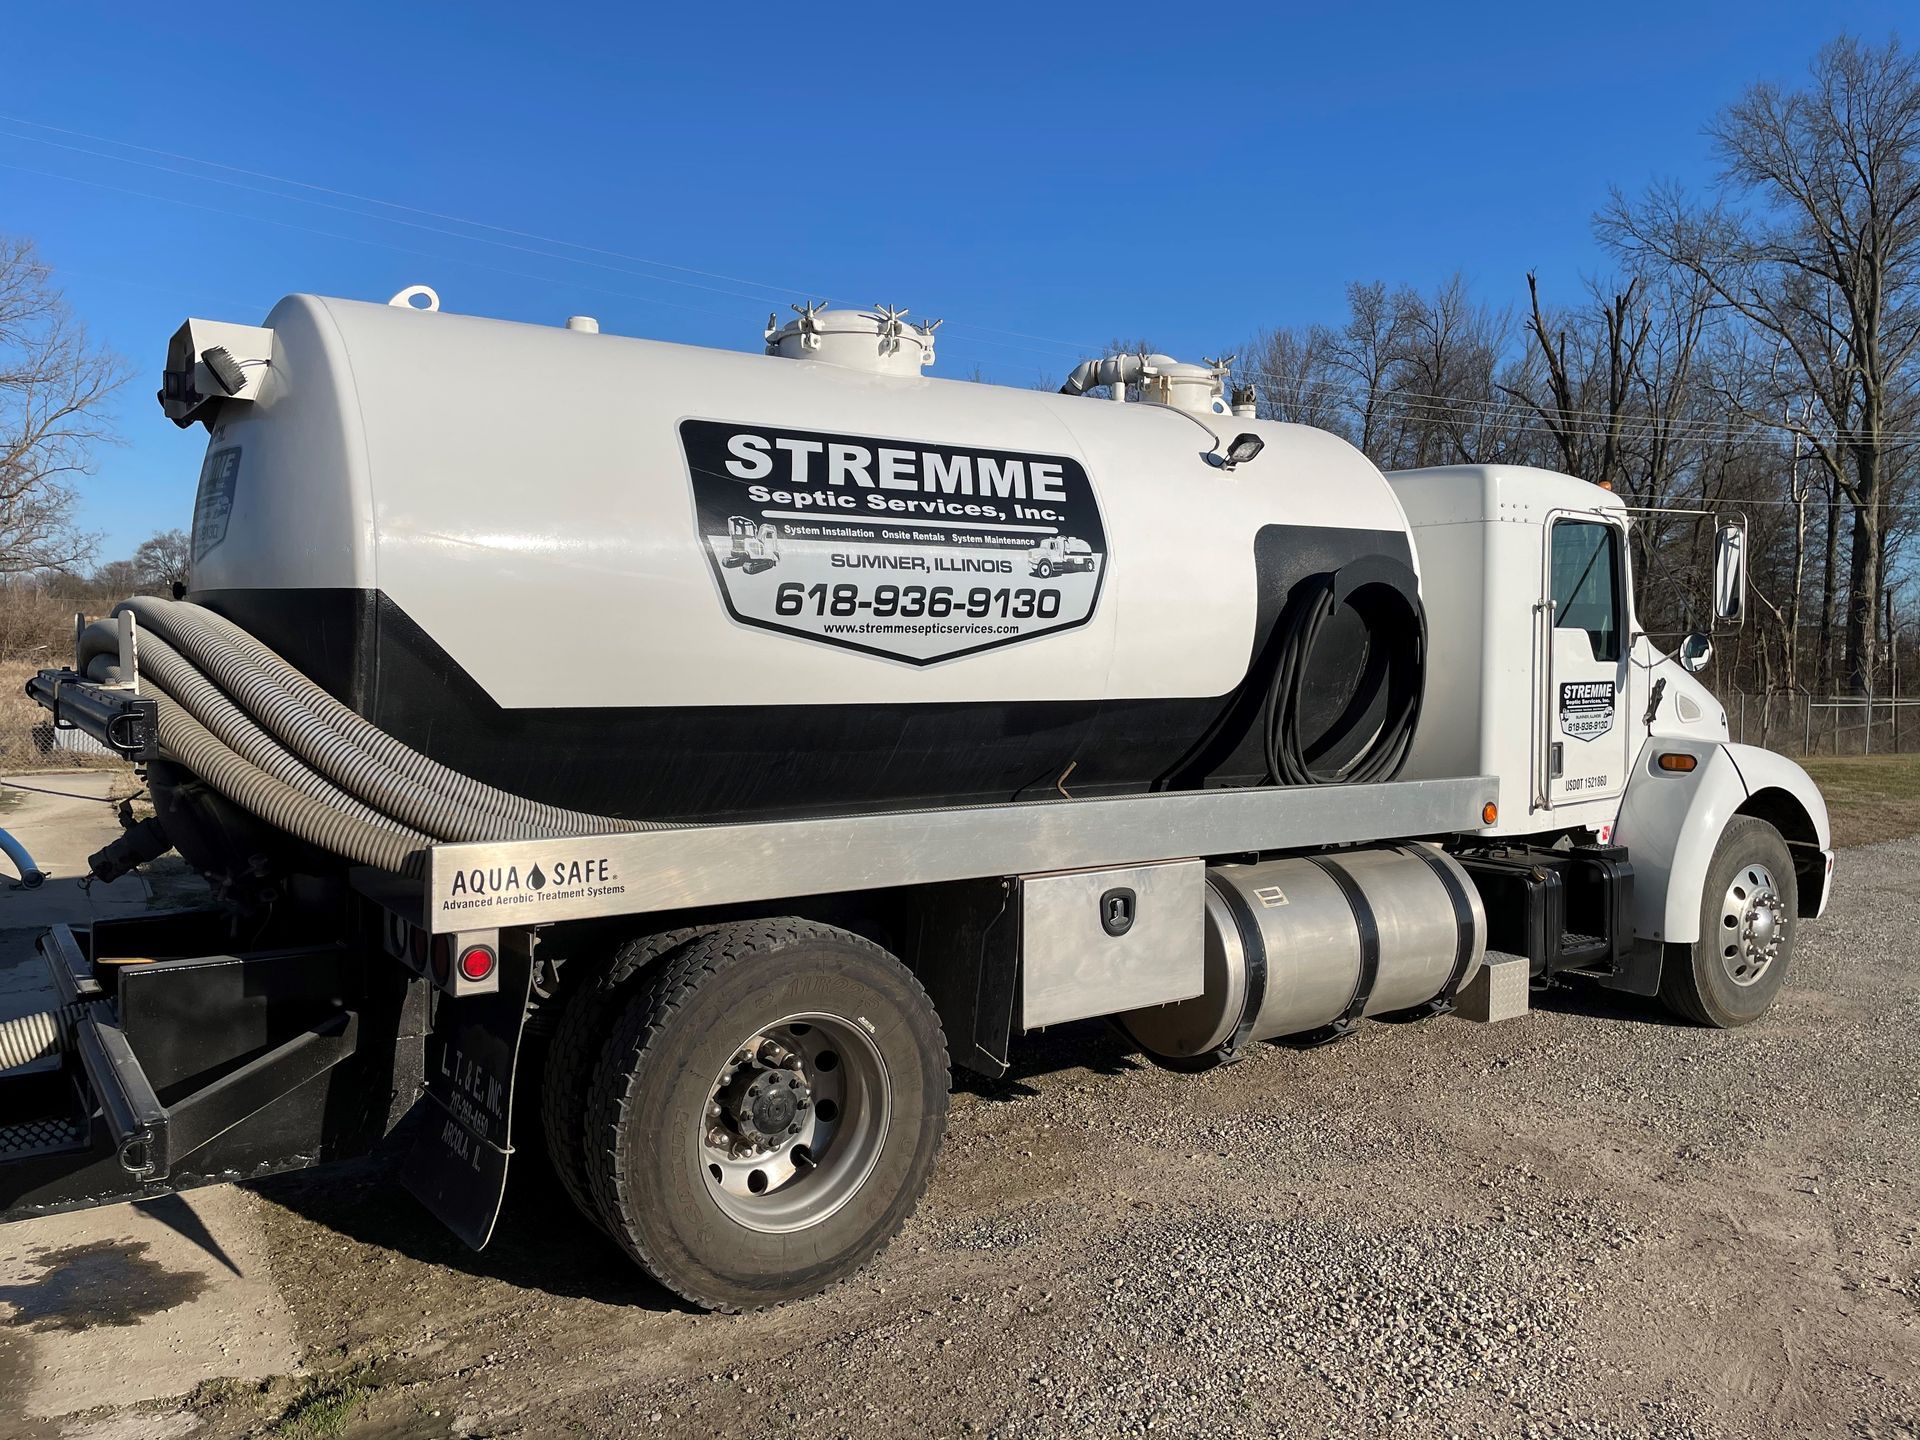 a streamme septic truck is parked on a gravel road